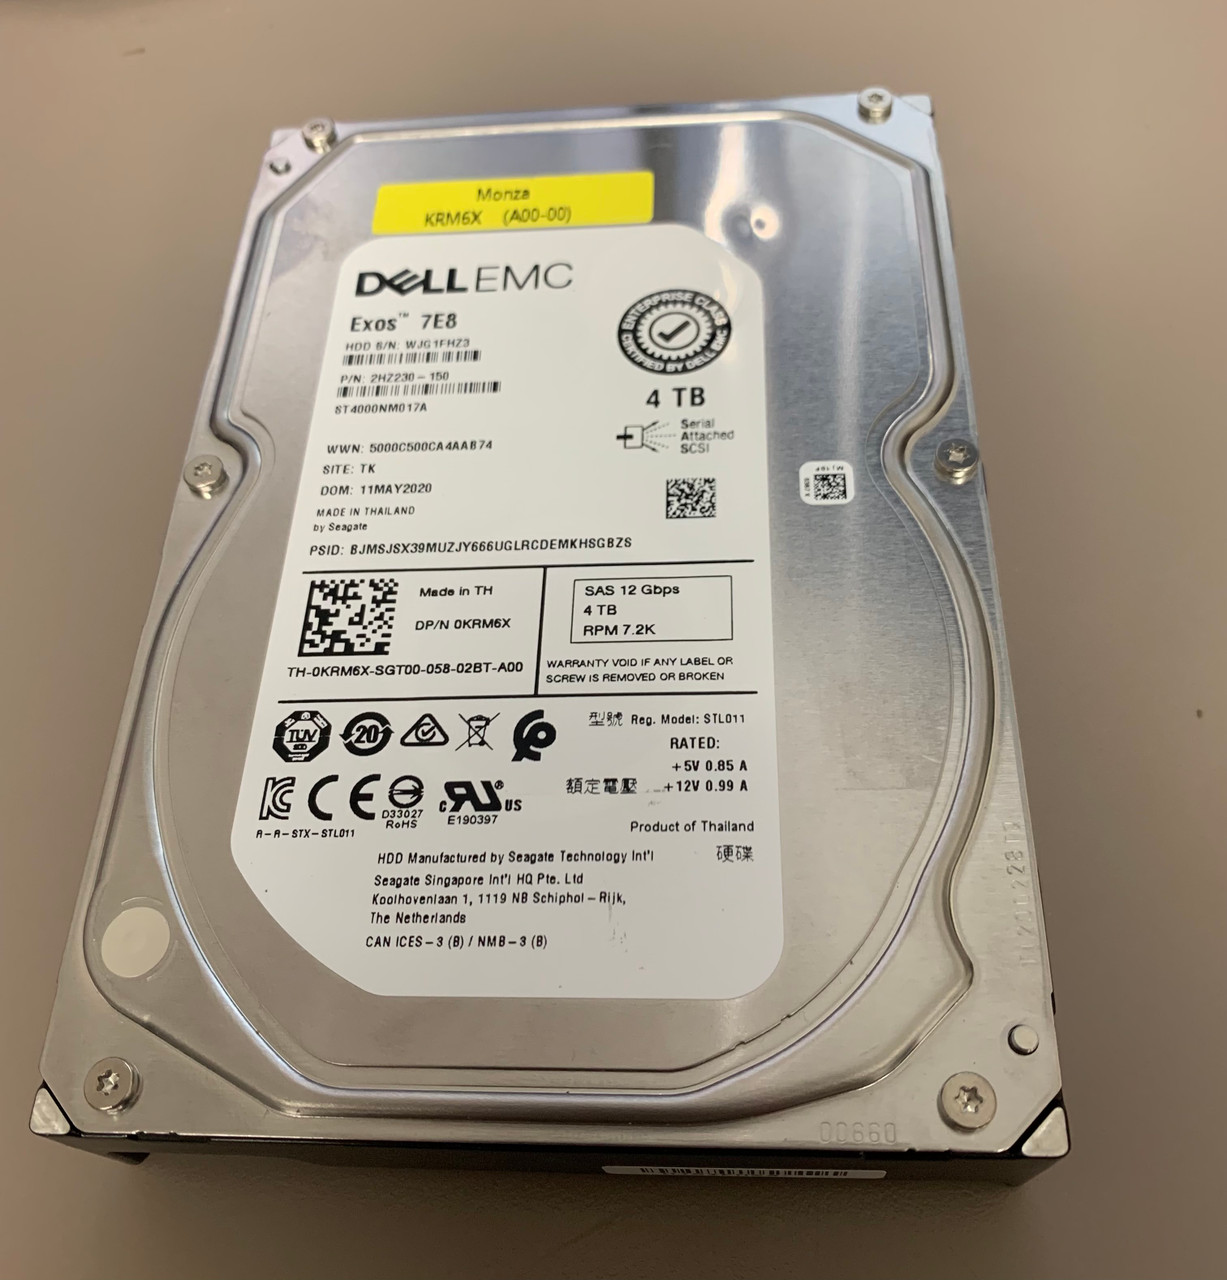 *Damaged* Dell KRM6X 4TB 12GBPS 7.2K 3.5" SAS Hard Drive (as Pictured)